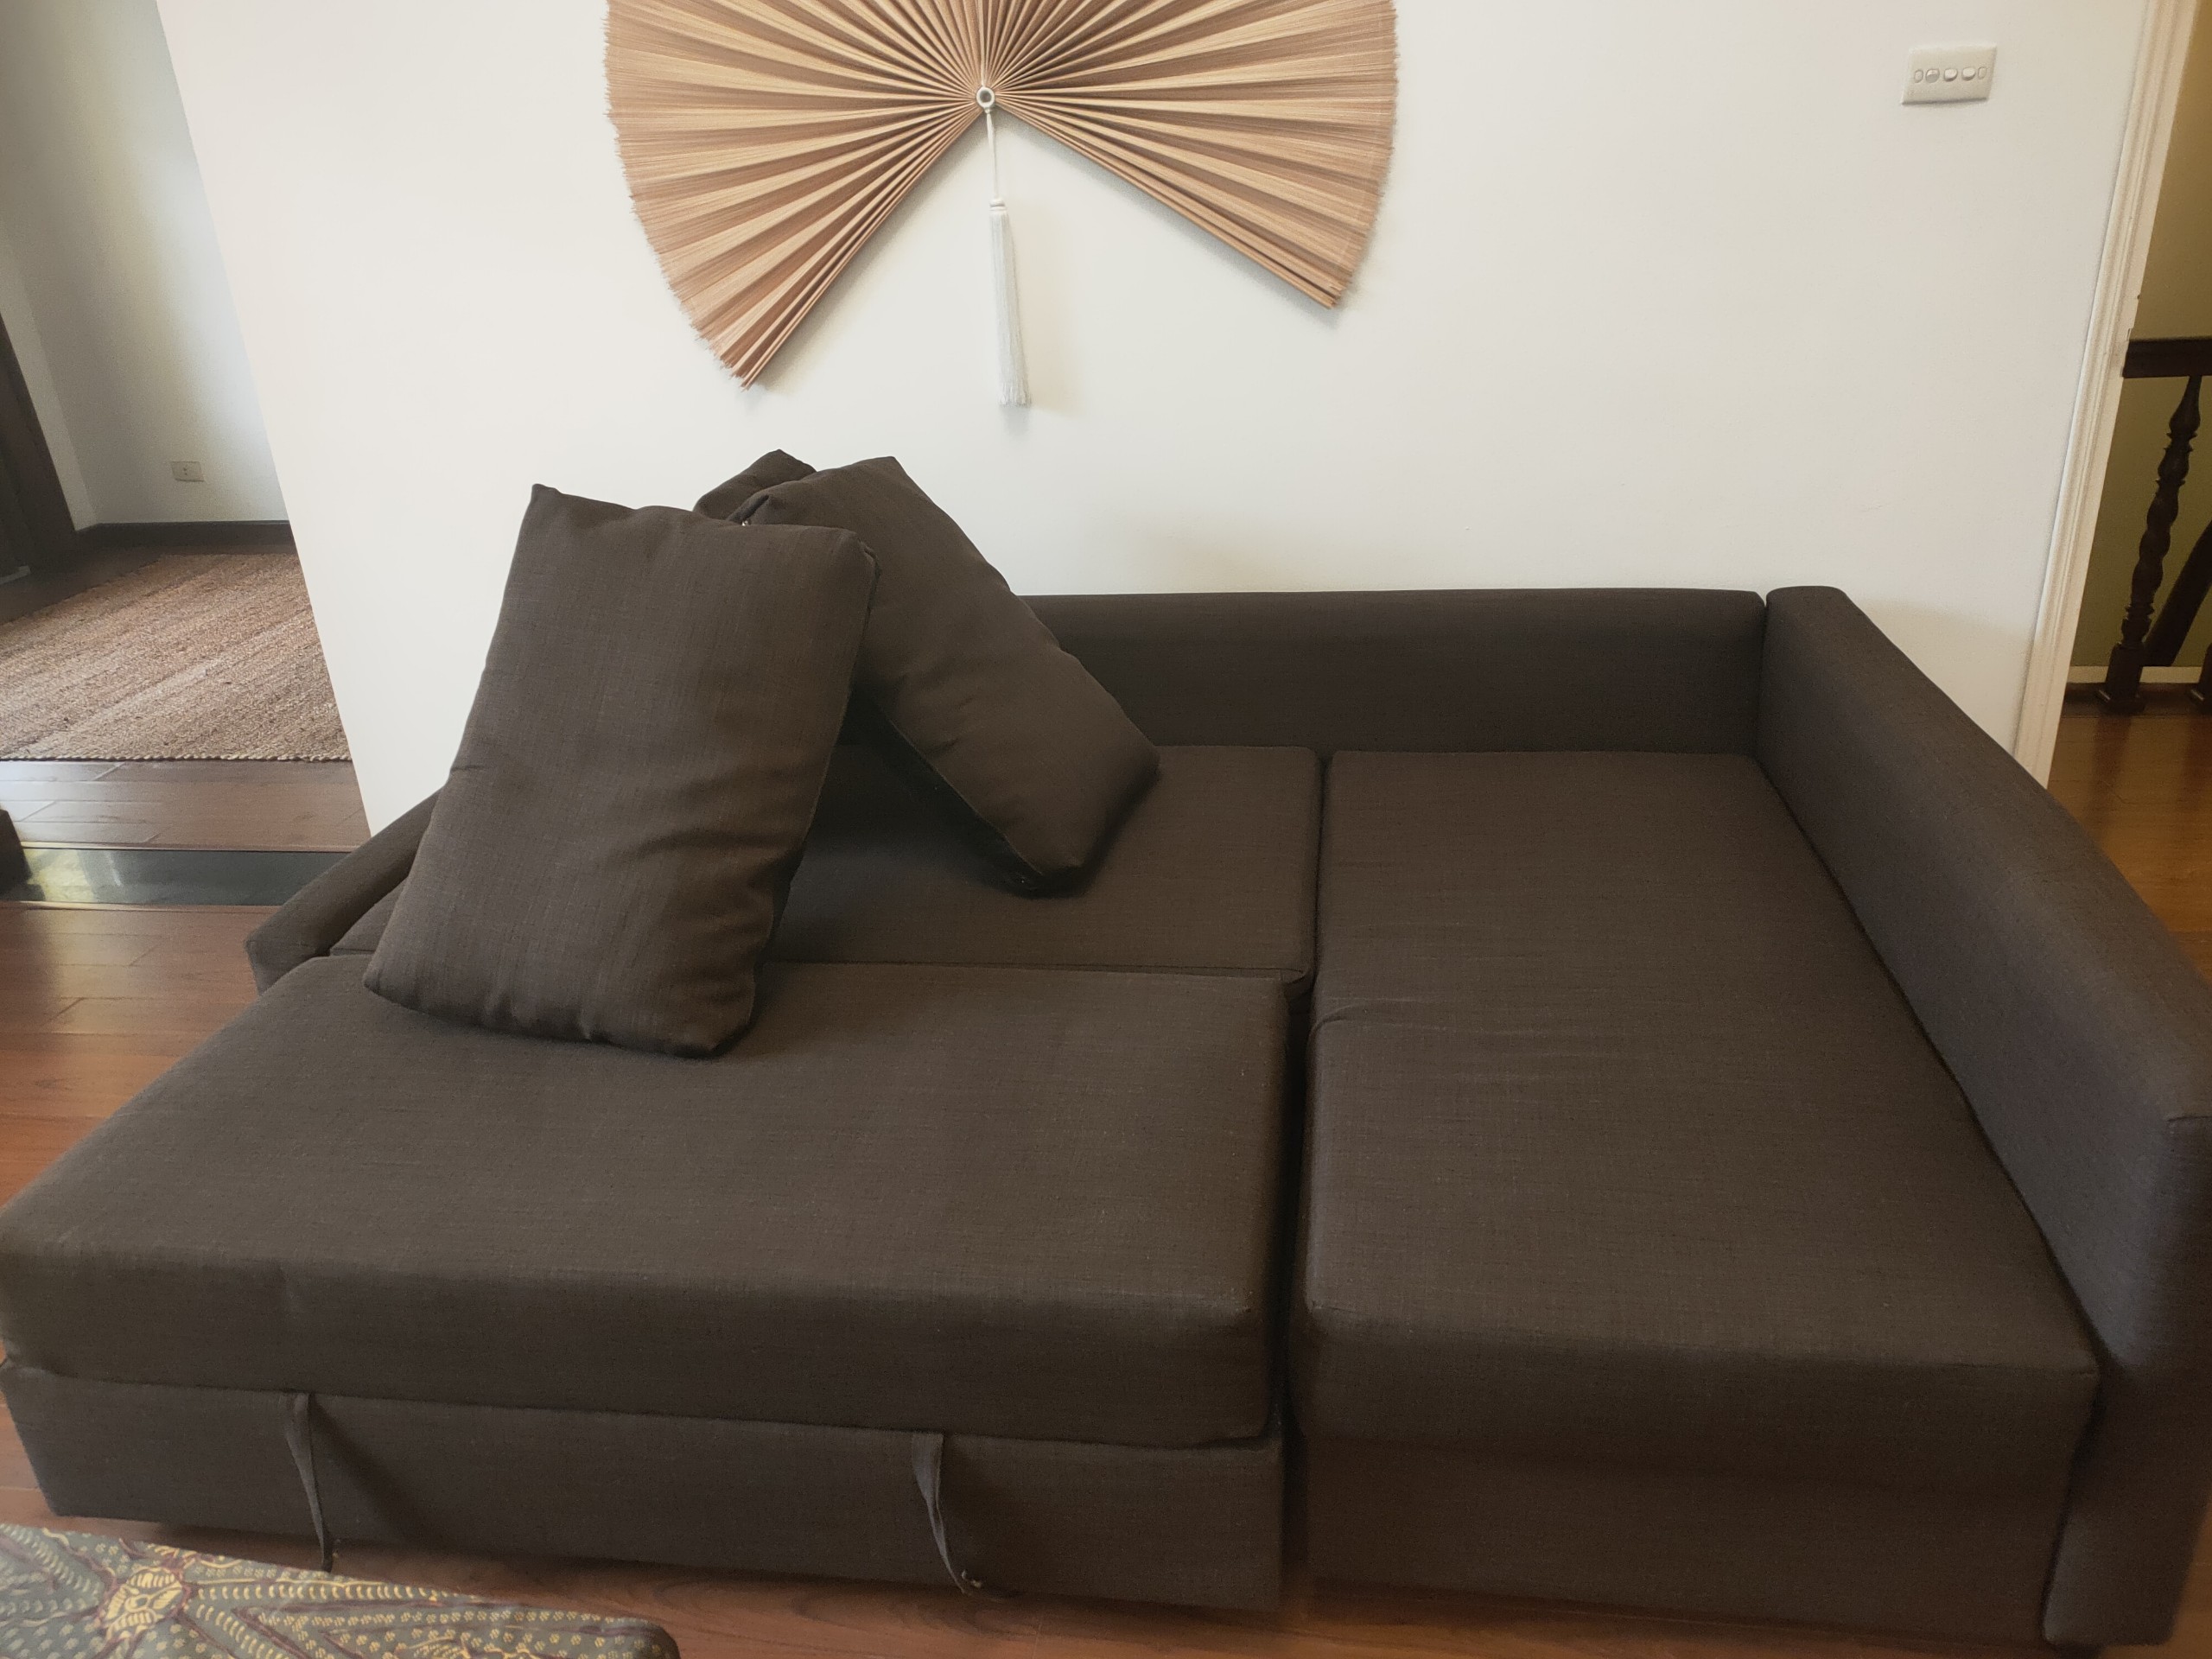 Sofa set steam cleaning